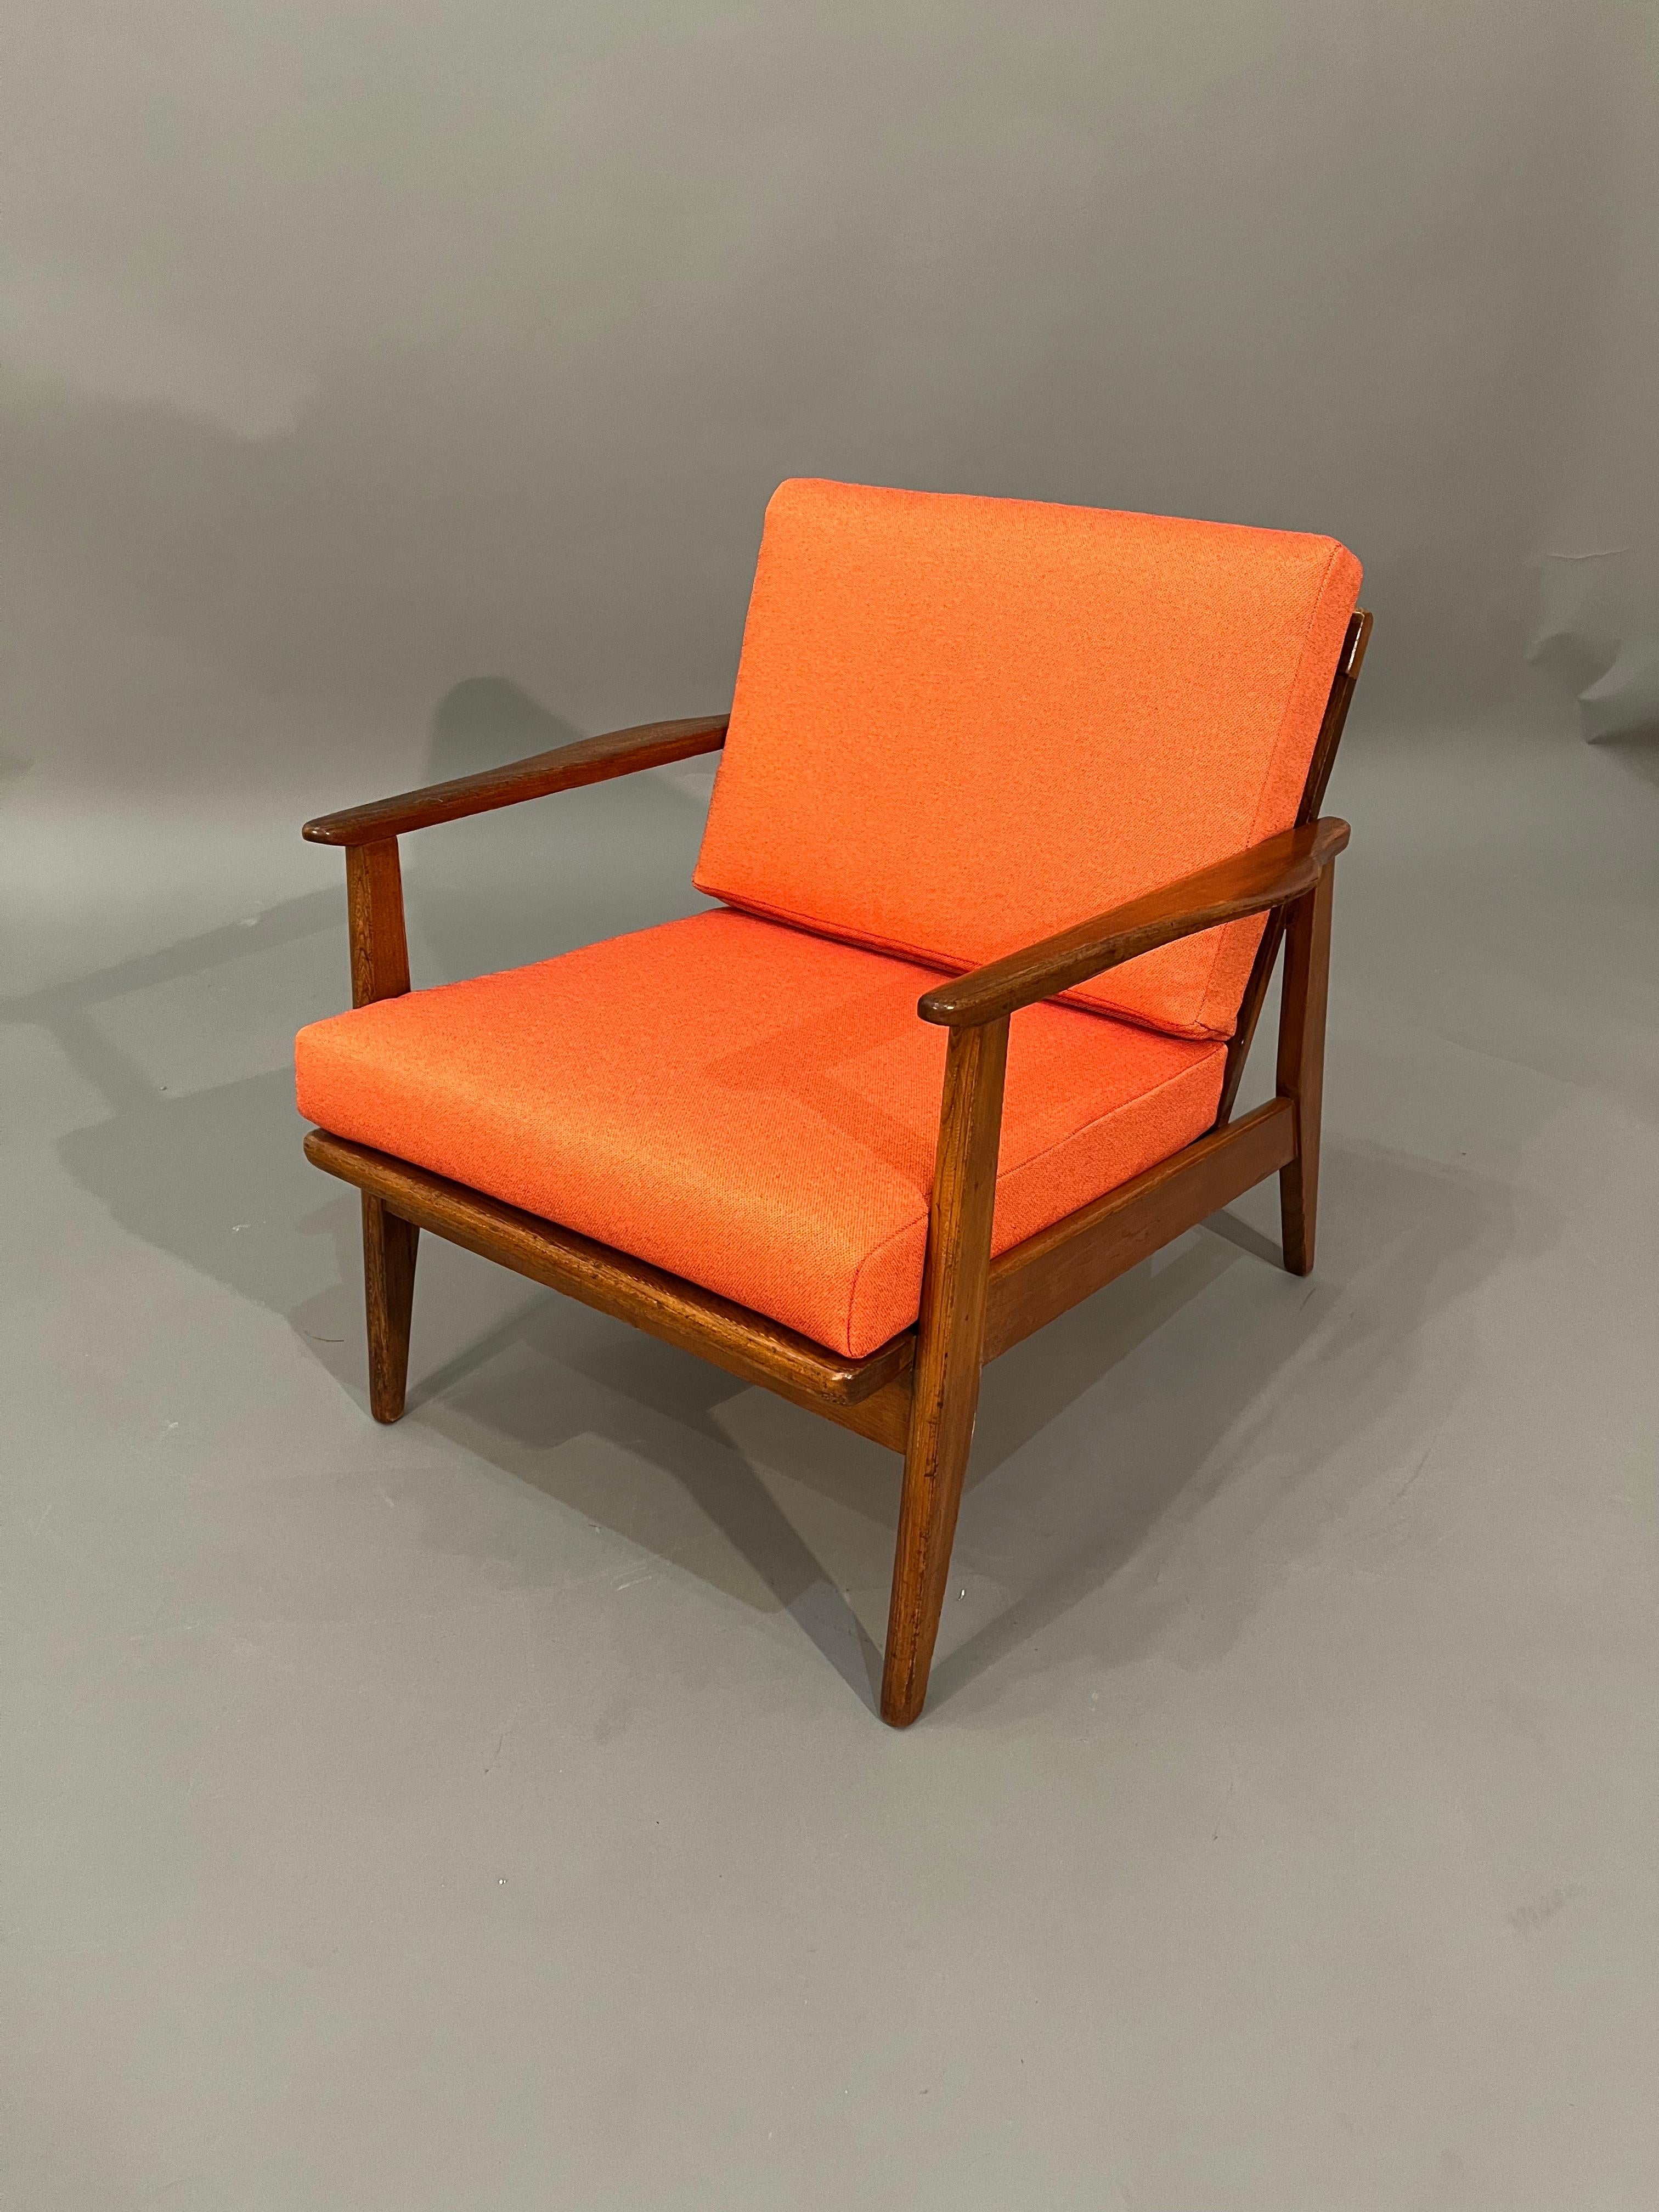 Mid-century, curated, walnut arm lounge chair 1960s Circa completely restored with new cushions with tweeted orange fabric.

Arm to arm: 25” inches 
Interior depth: 20” inches 
Cushions thickness: 3.5” inches 
Seat hight: 16” inches 
Arms